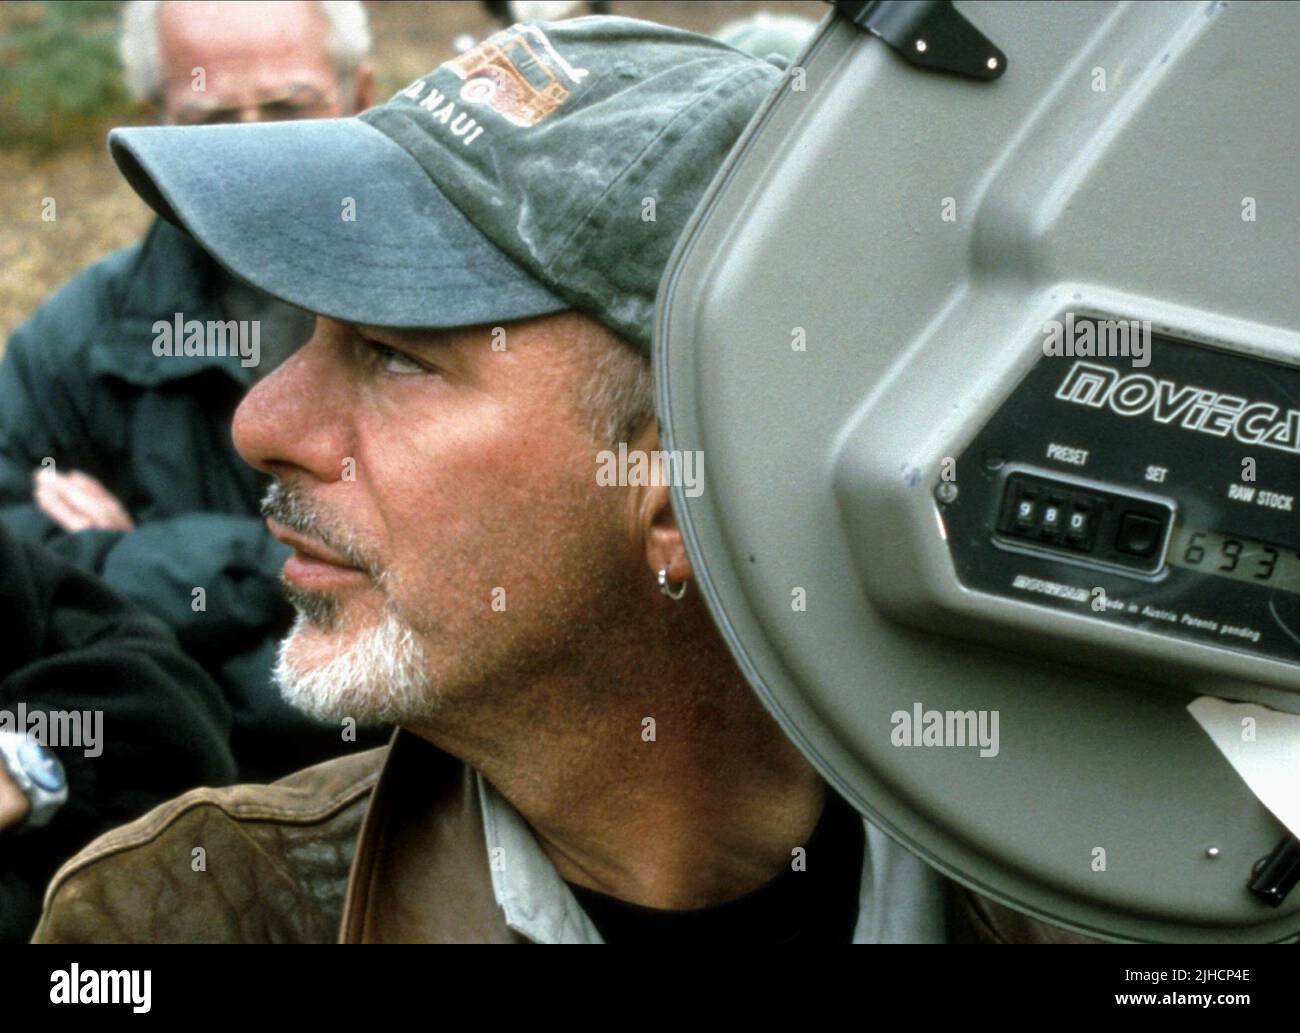 ROB COHEN, THE FAST AND THE FURIOUS, 2001 Stock Photo